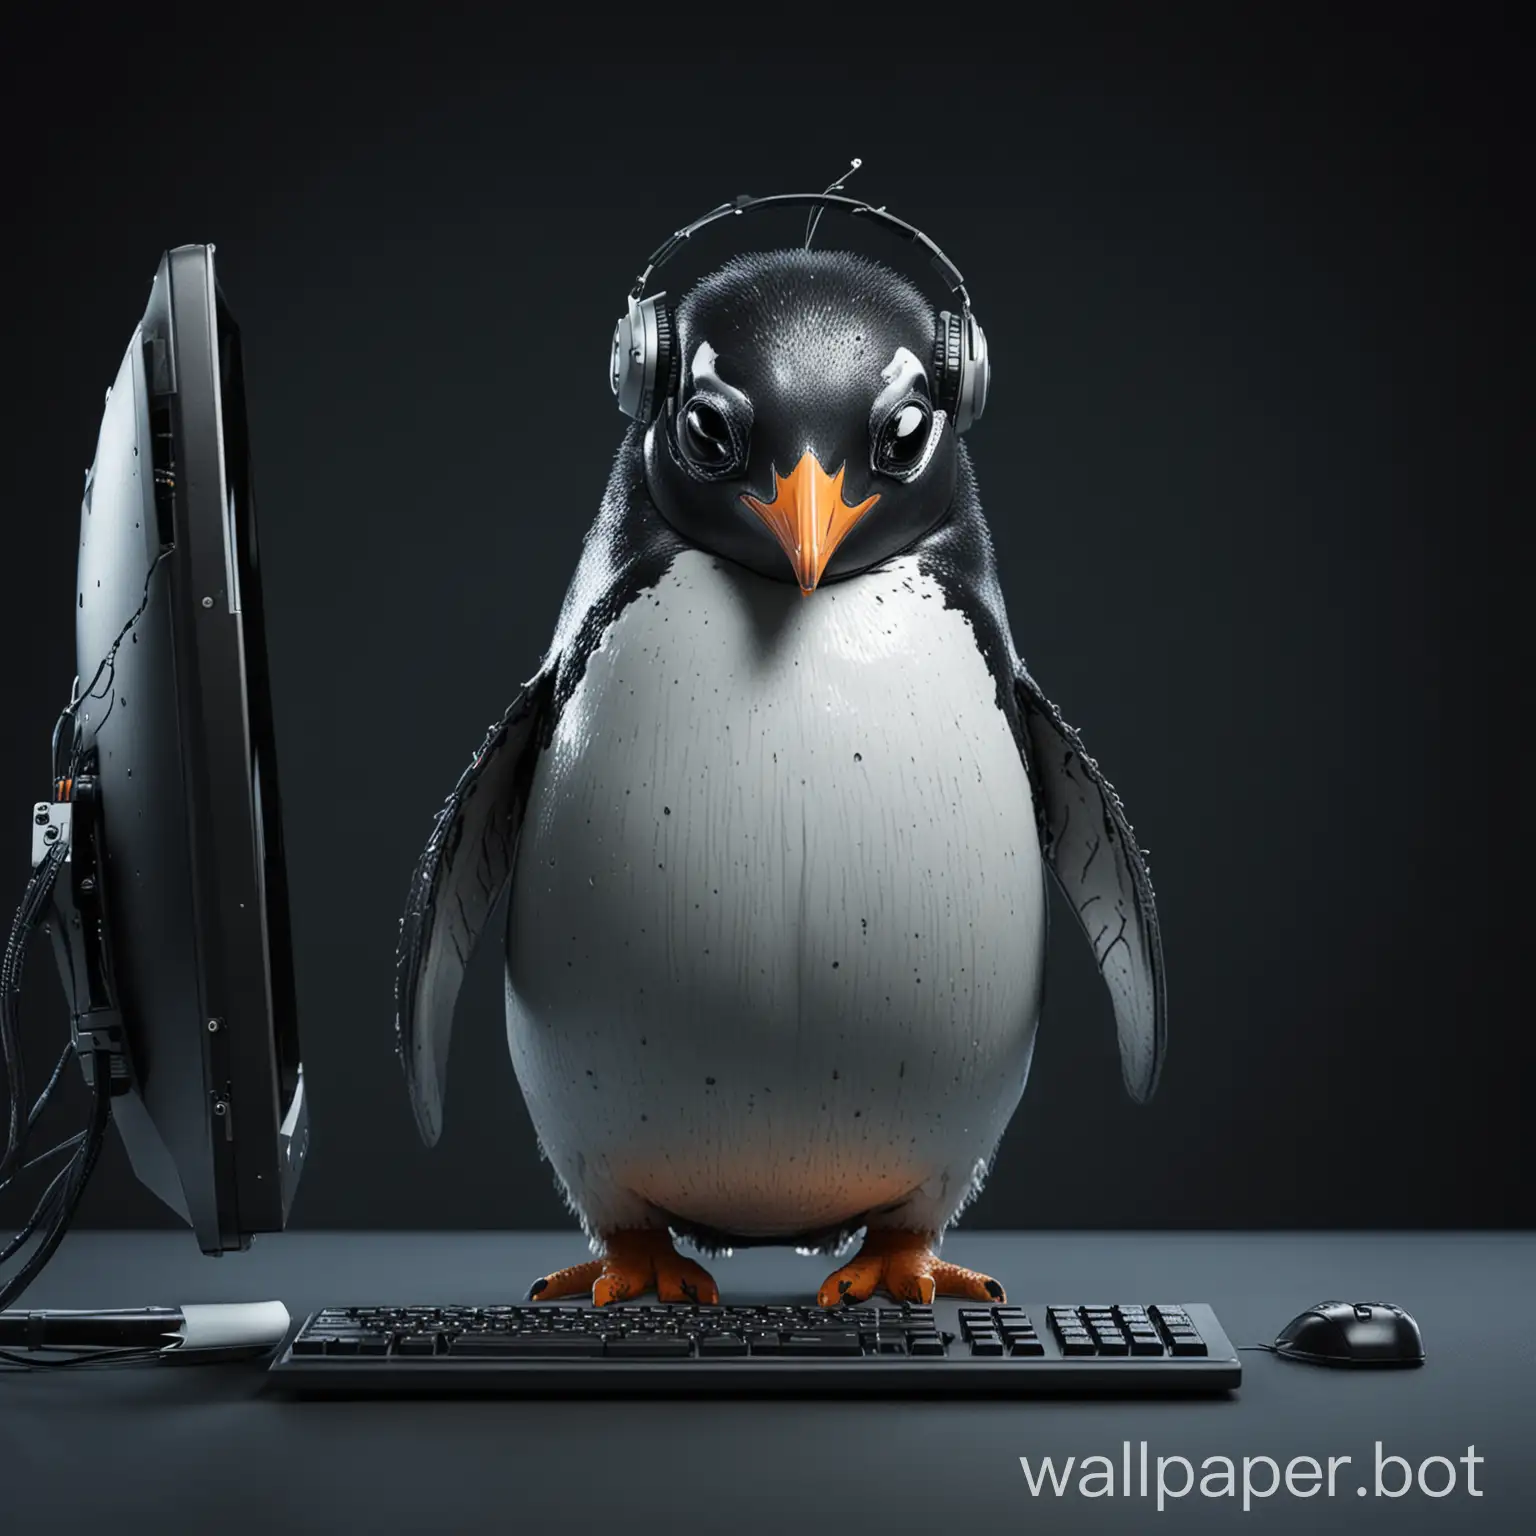 cyborg penguin behind a computer on a dark background